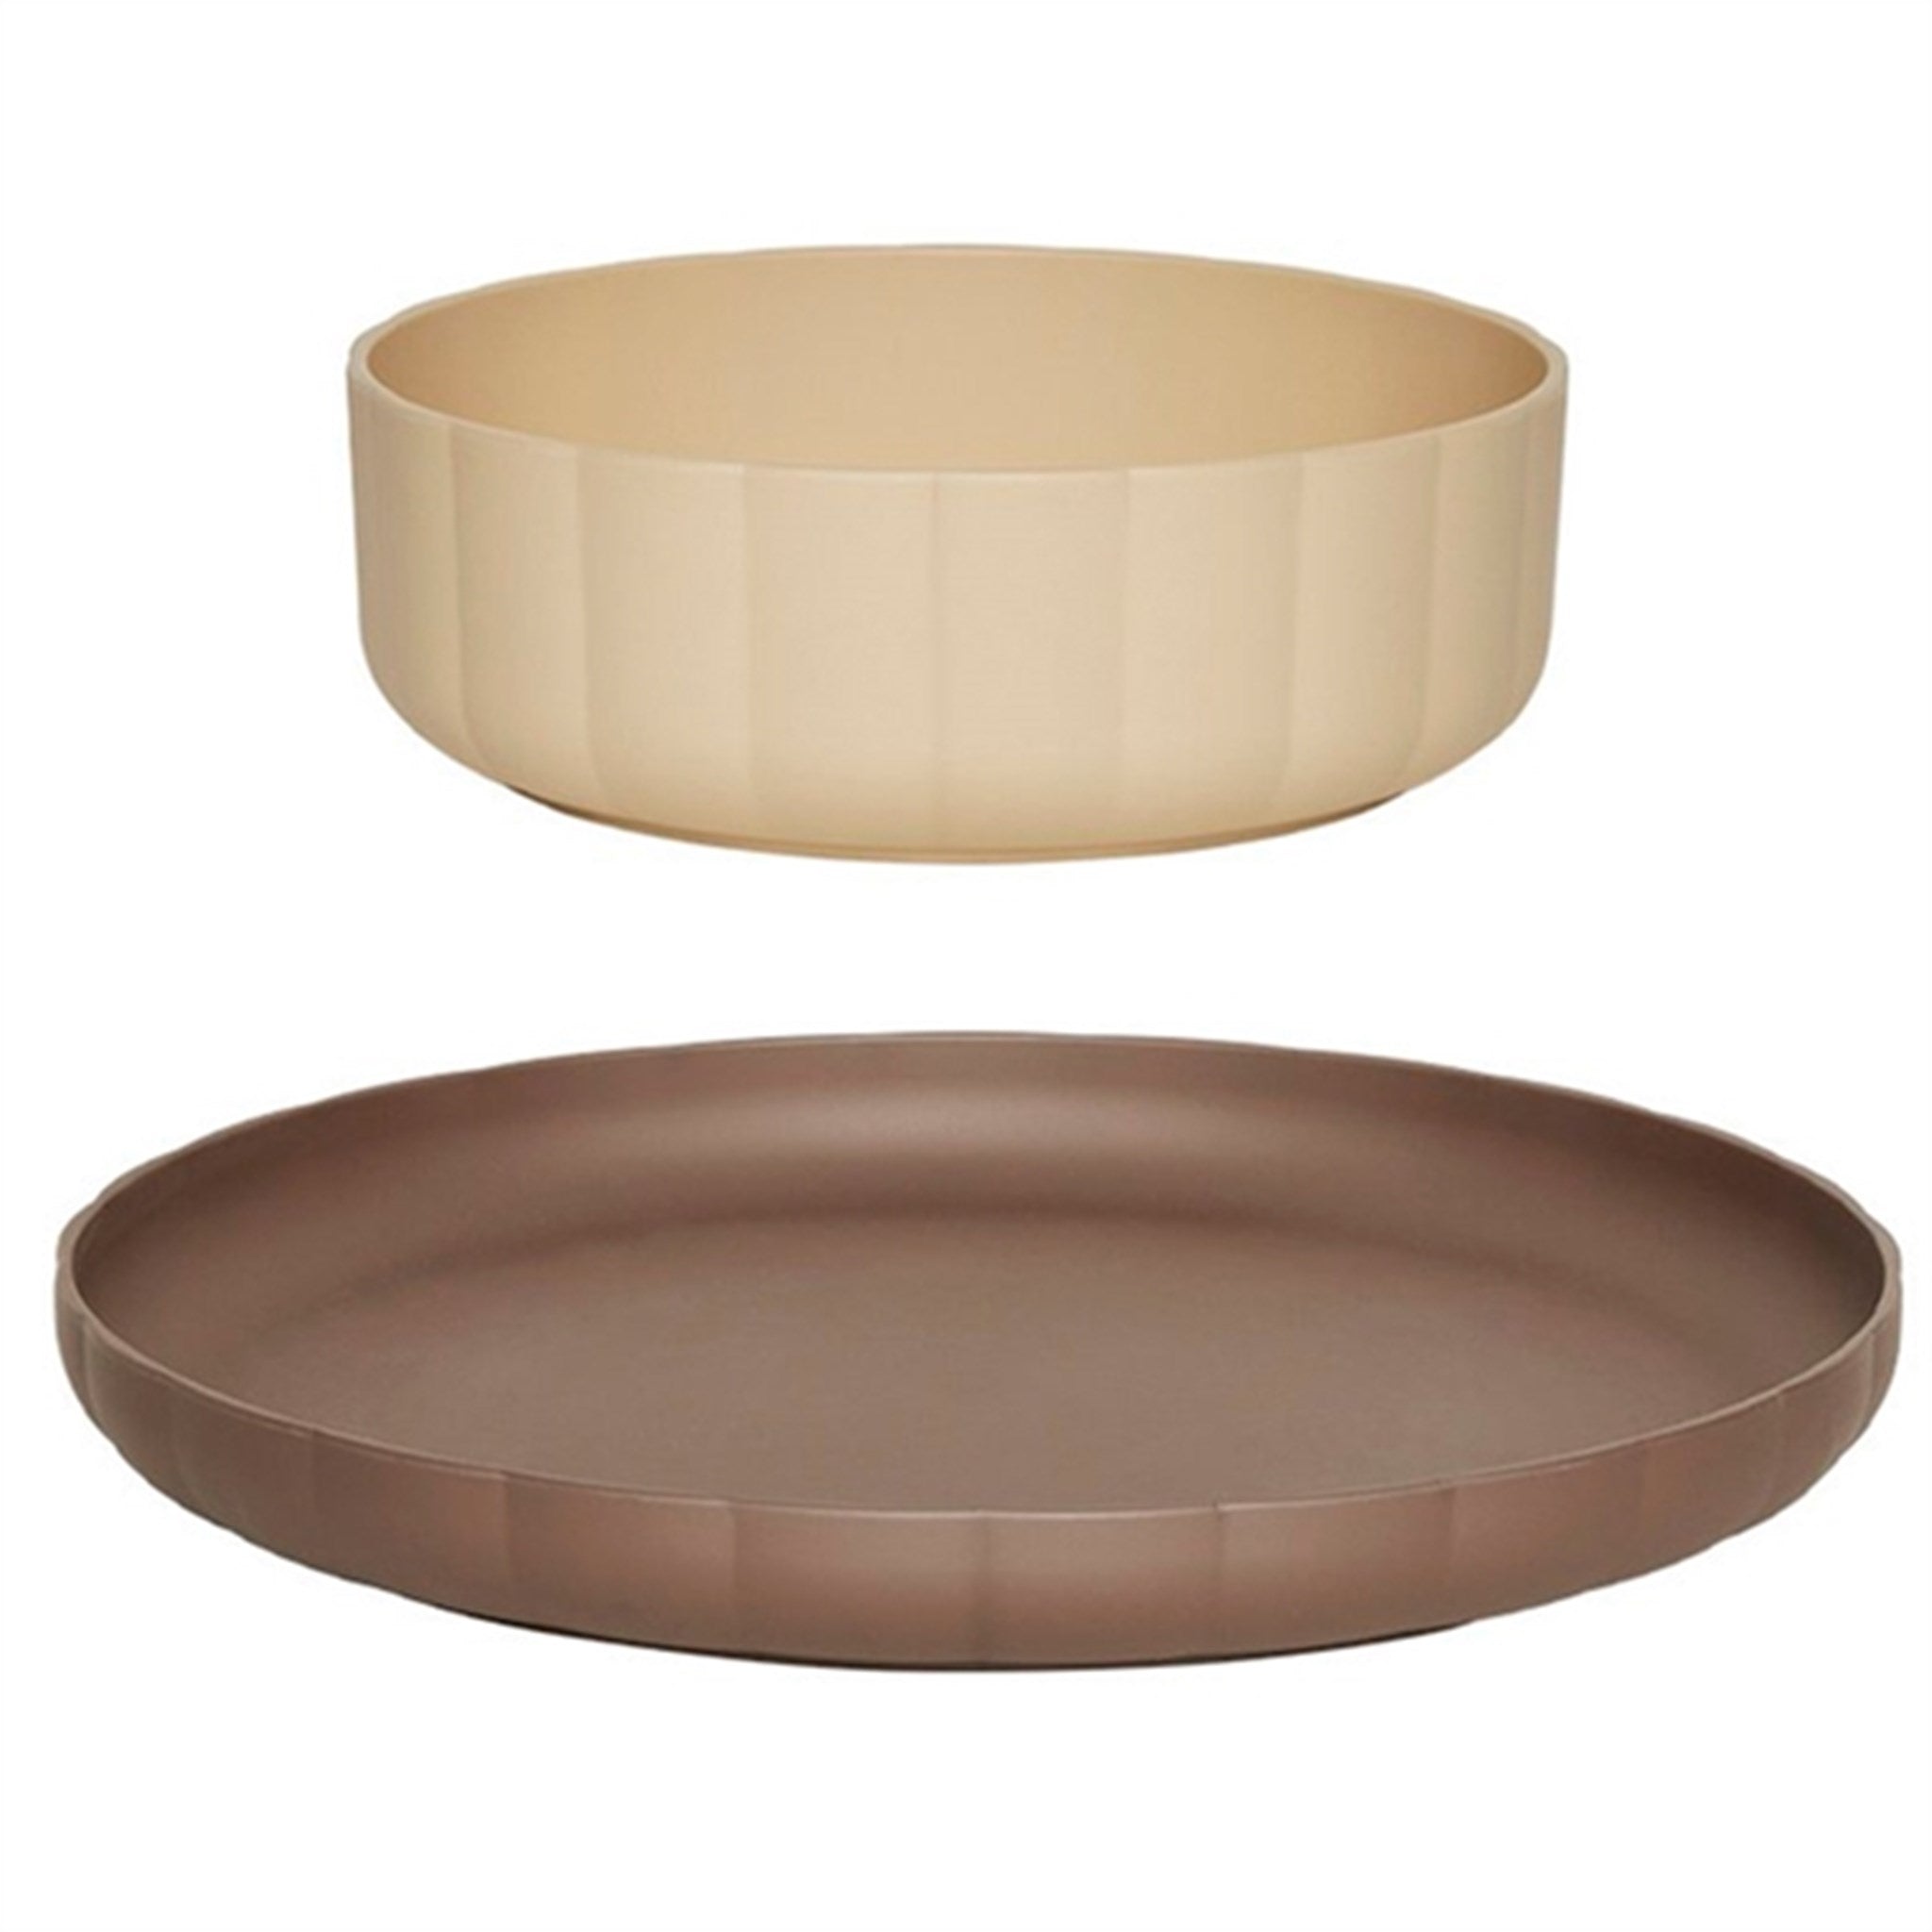 OYOY Pullo Plate and Bowl Taupe / Vanilla